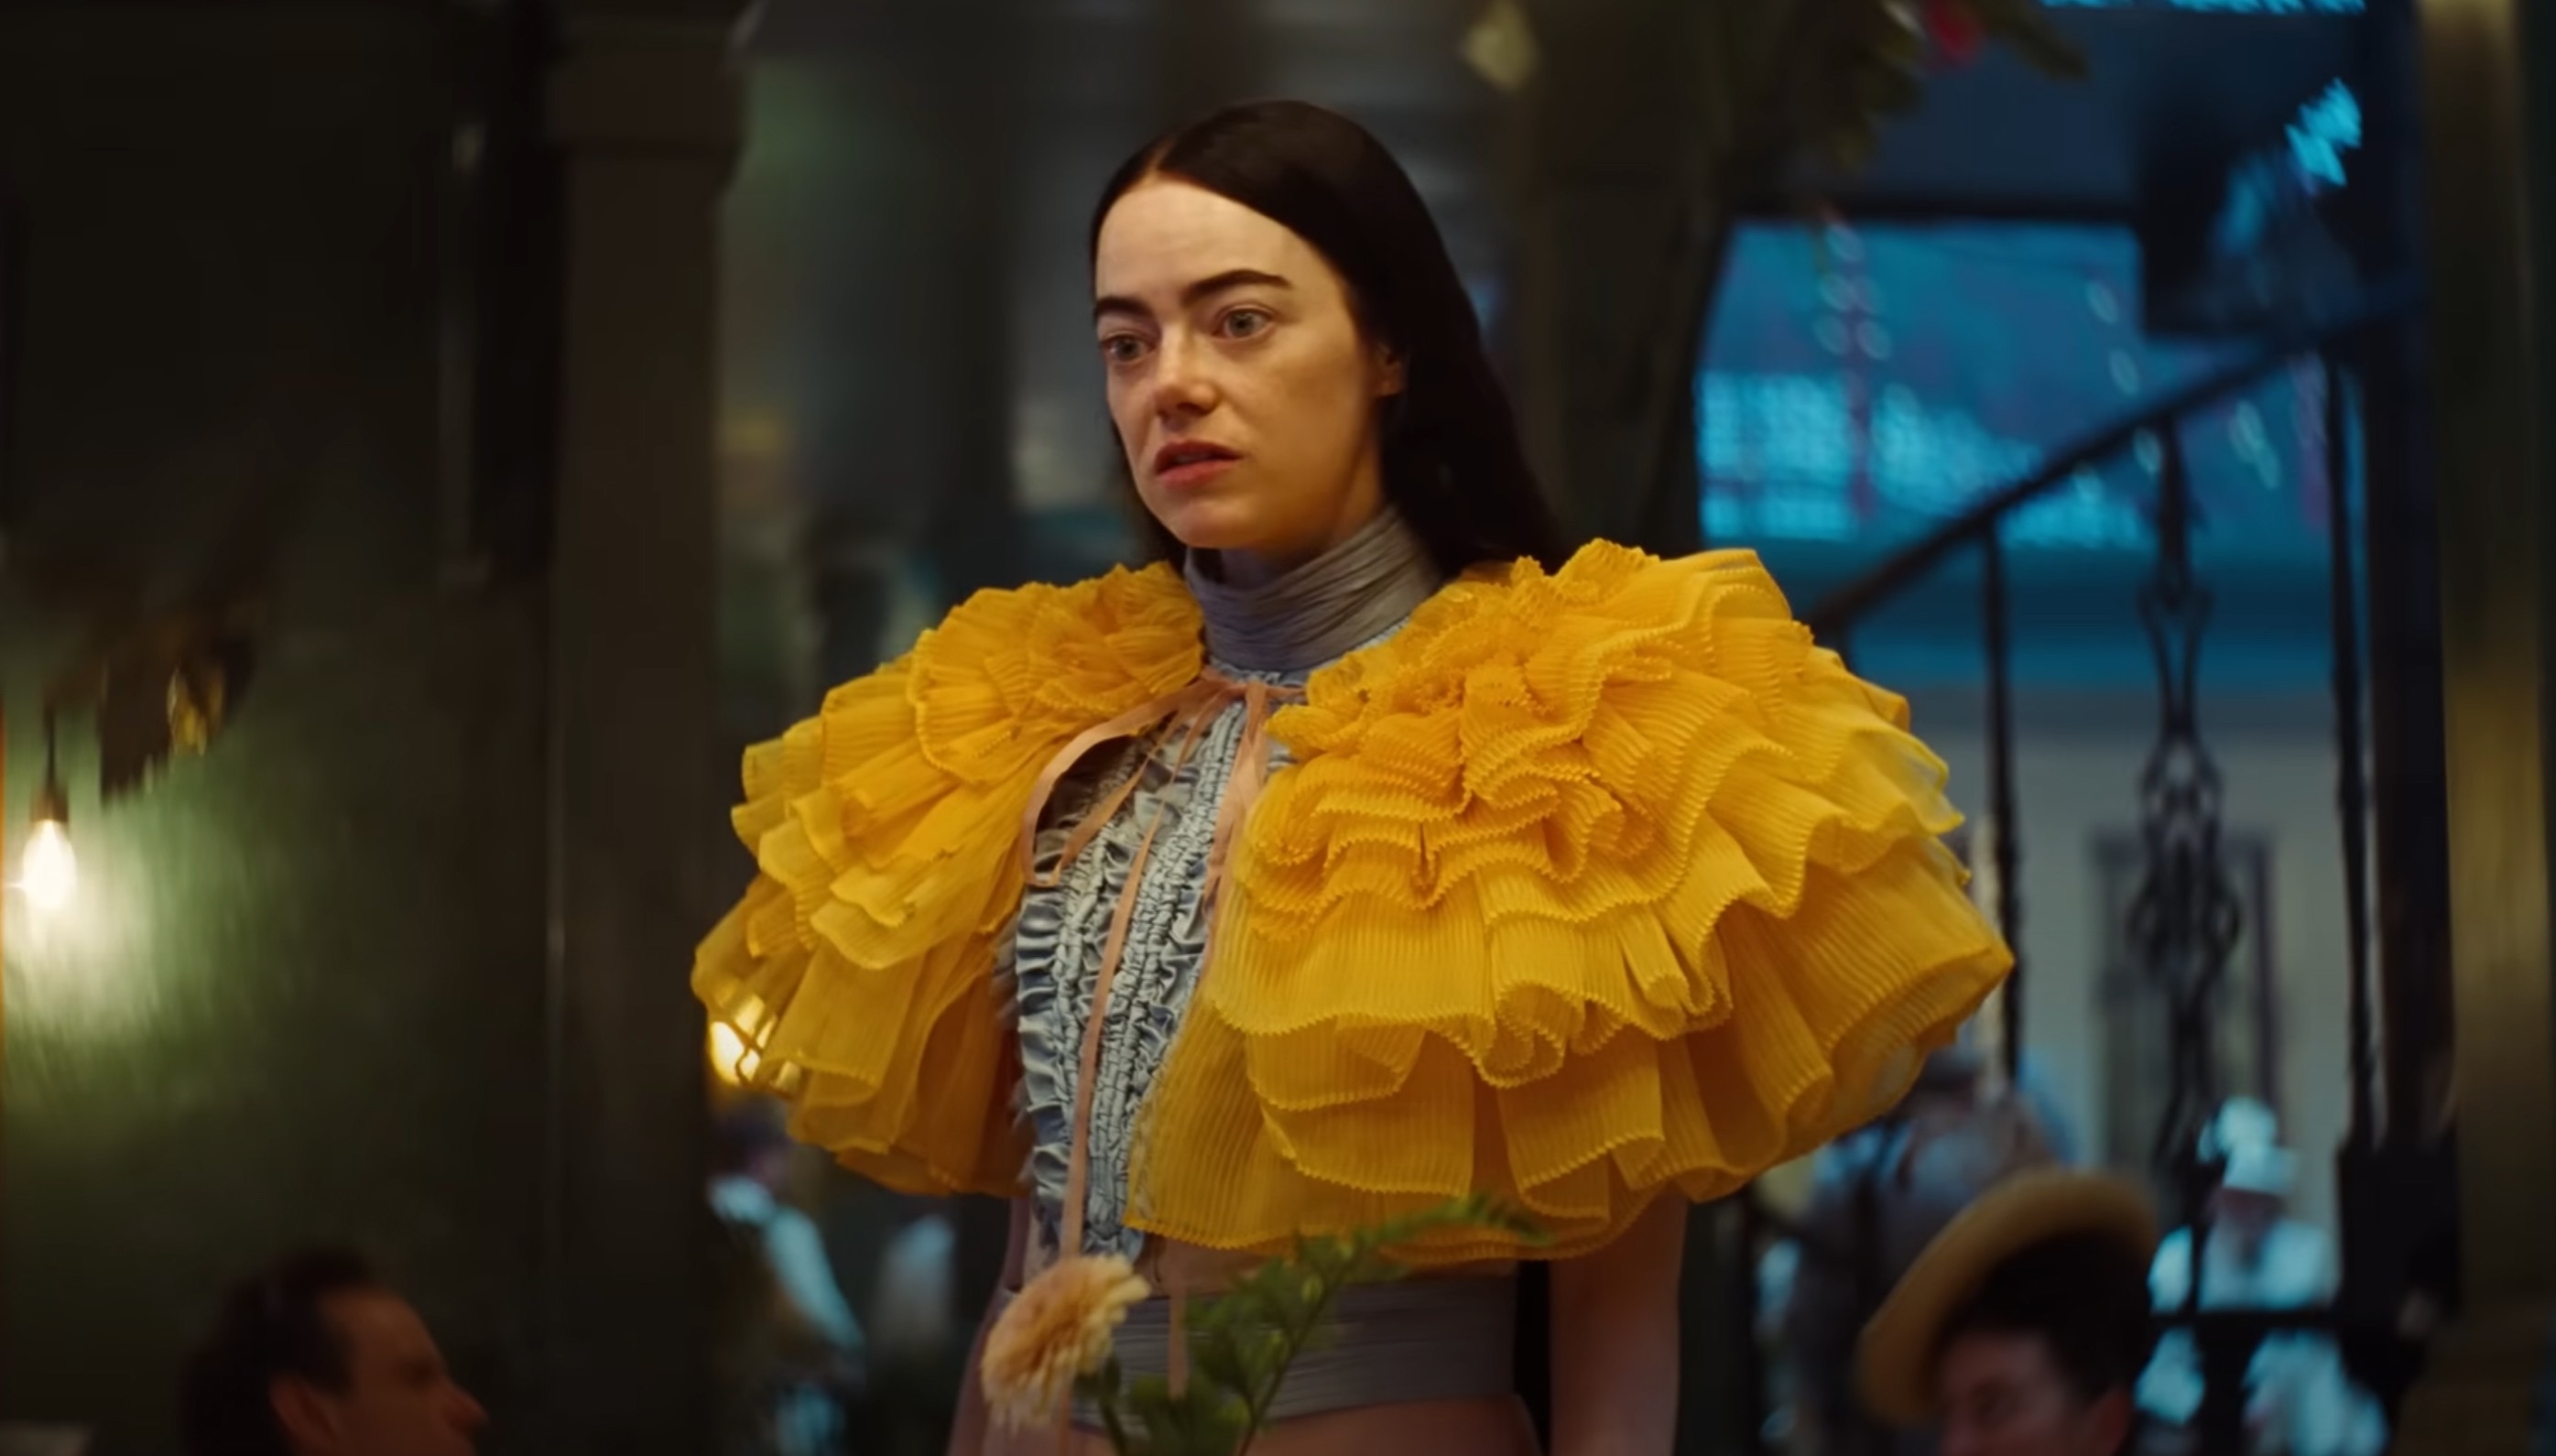 Emma Stone in an elaborate yellow ruffled outfit